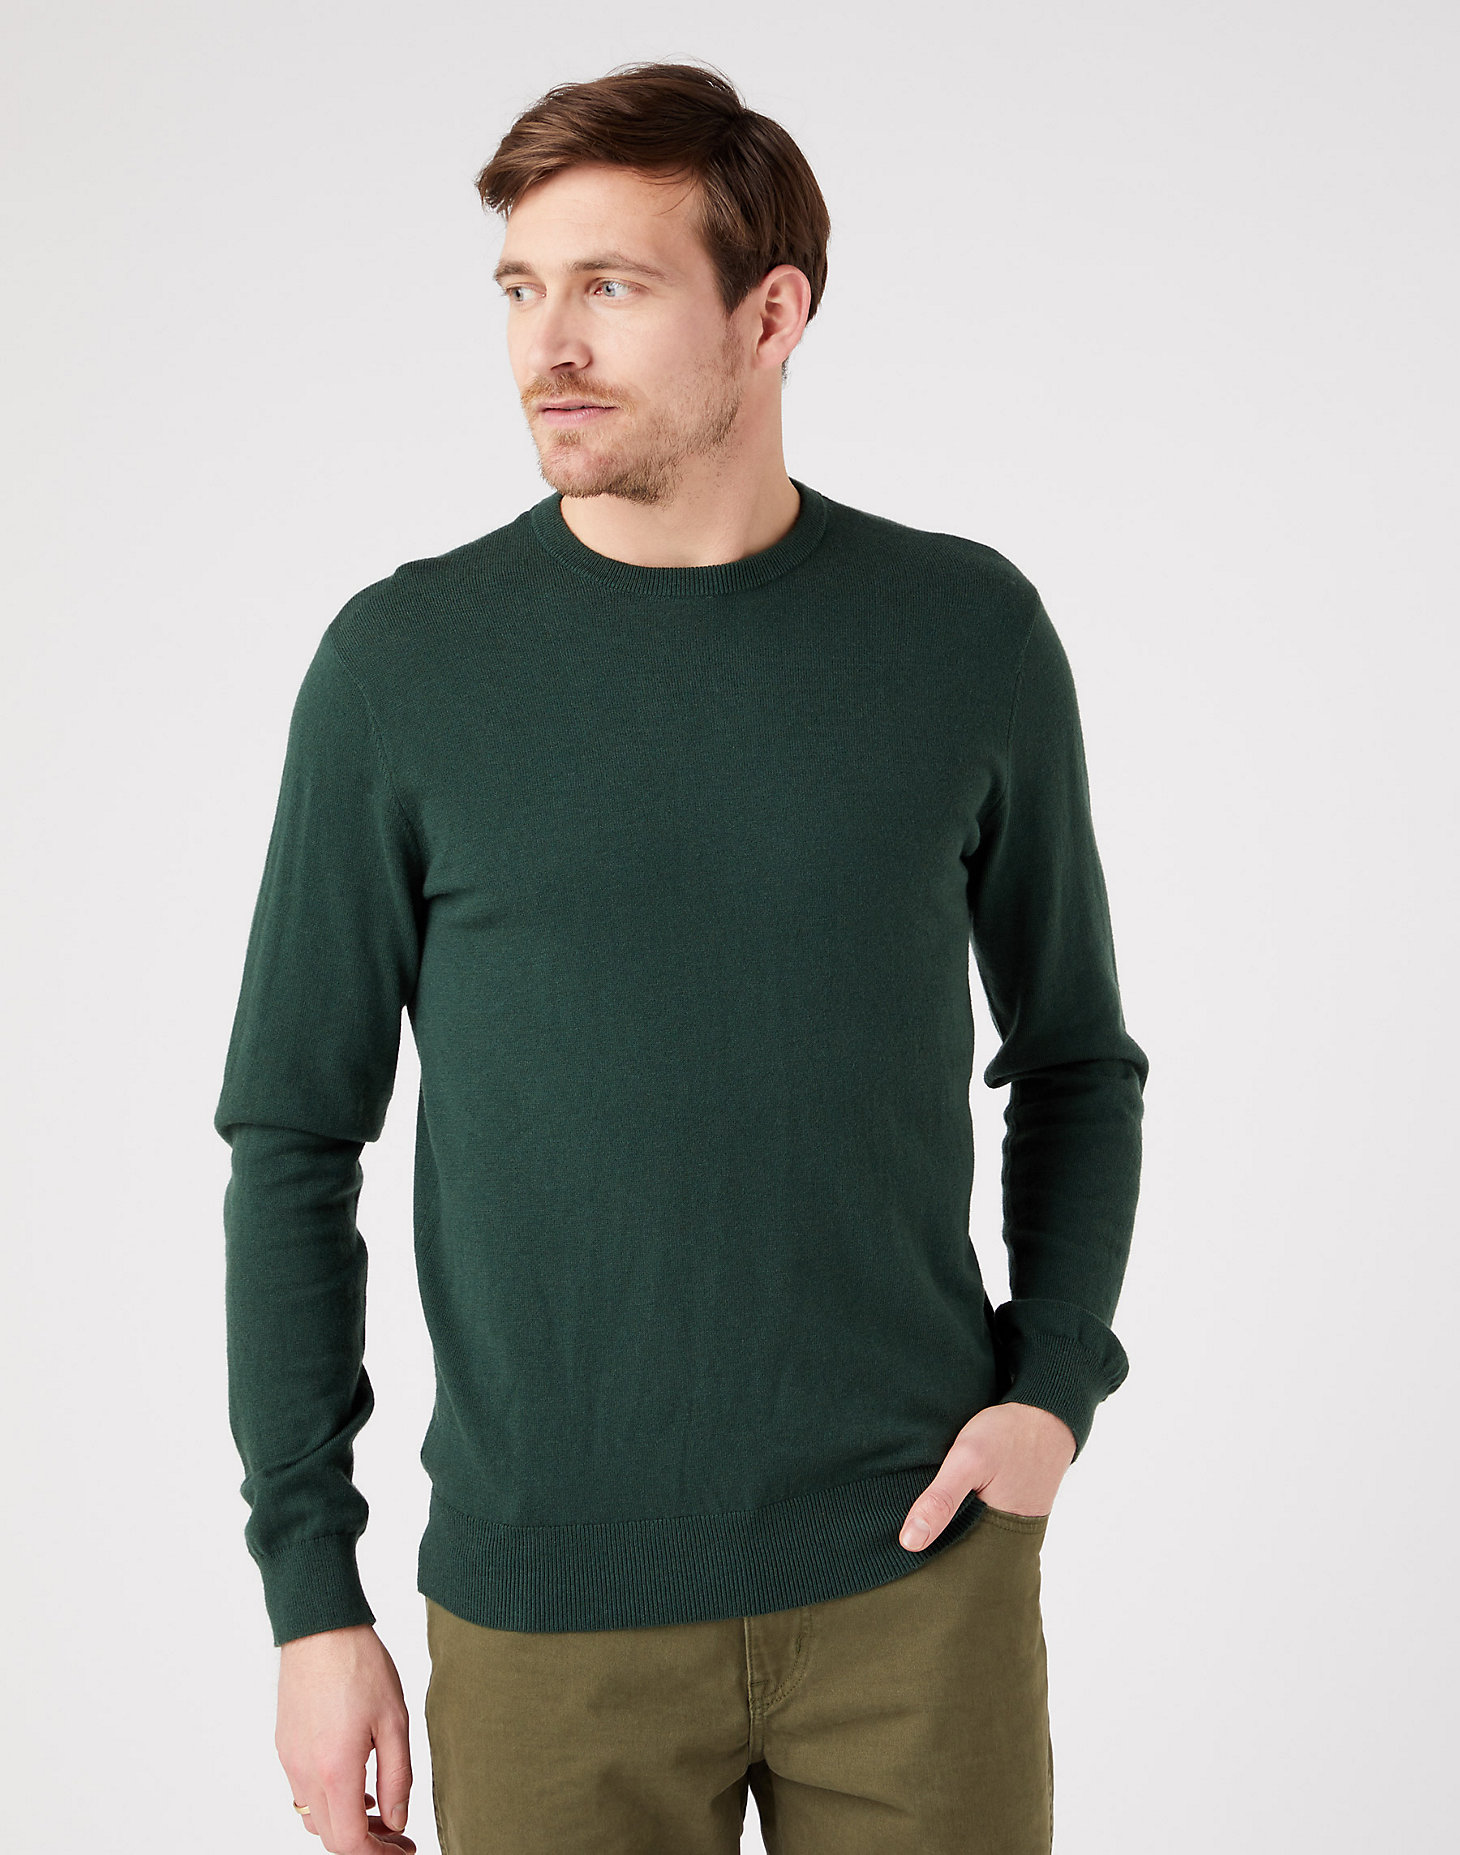 Crewneck Knit in Sycamore Green main view